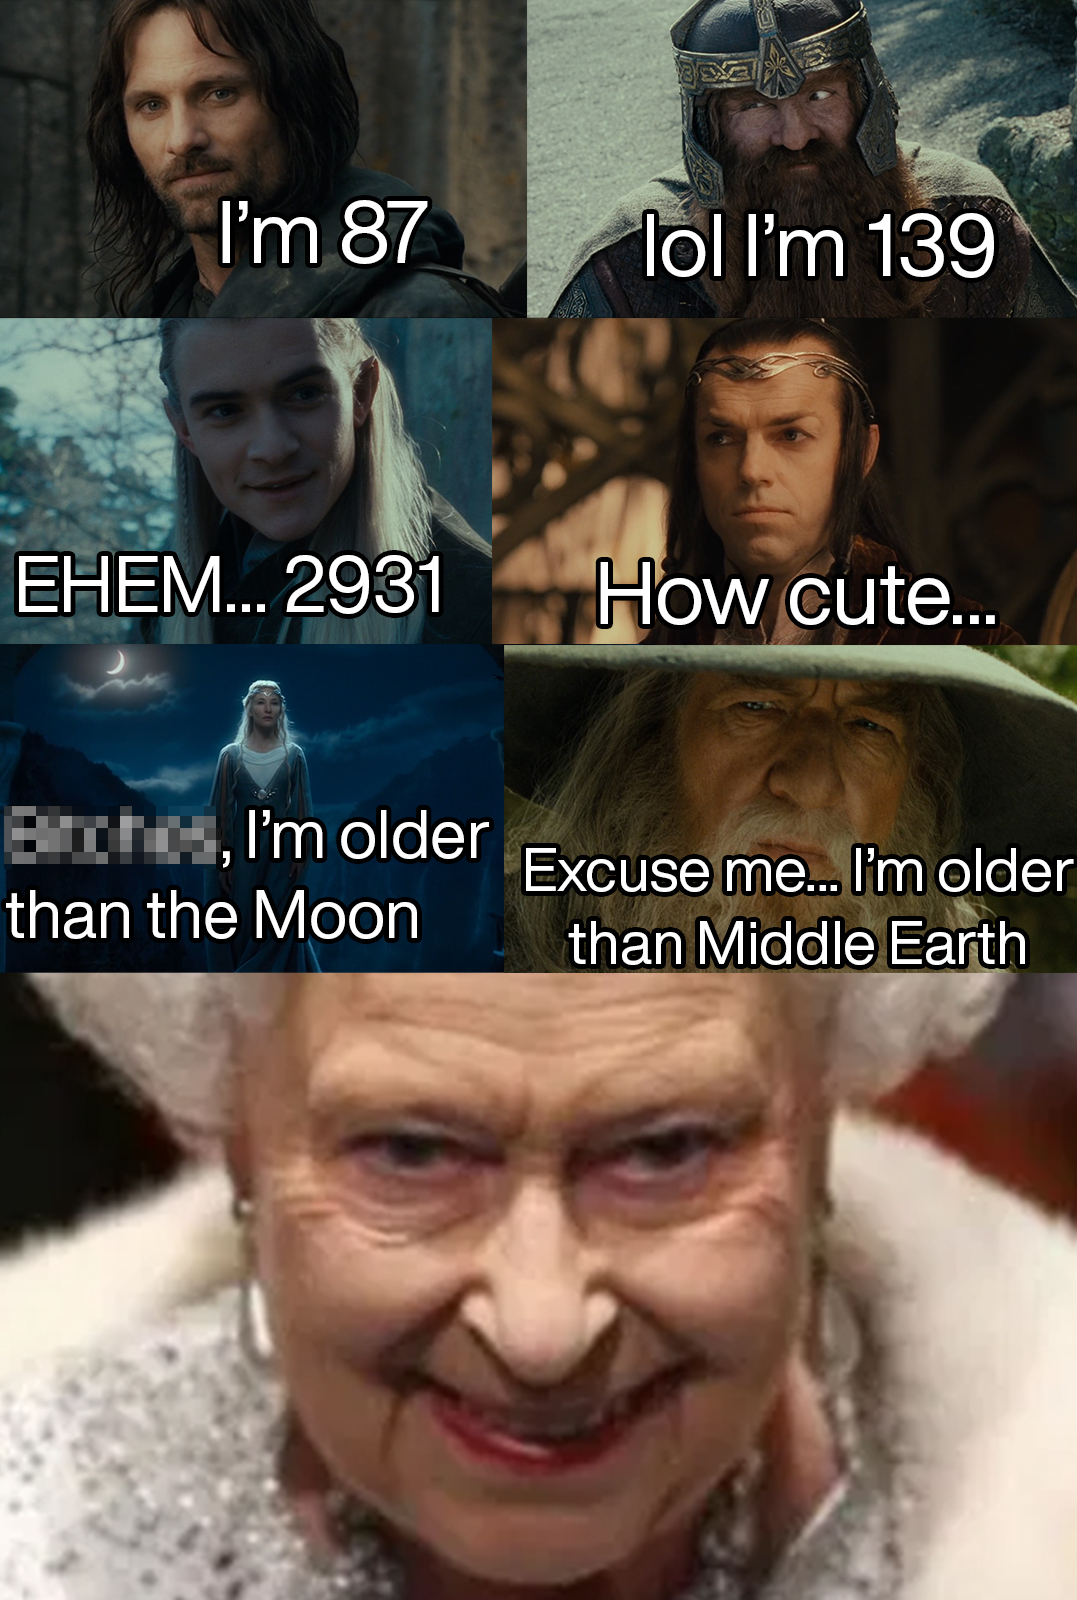 I'm 87 lol I'm 139 Ehem... 2931 How cute... Bitches, I'm older than the Moon Excuse me... I'm older than Middle Earth